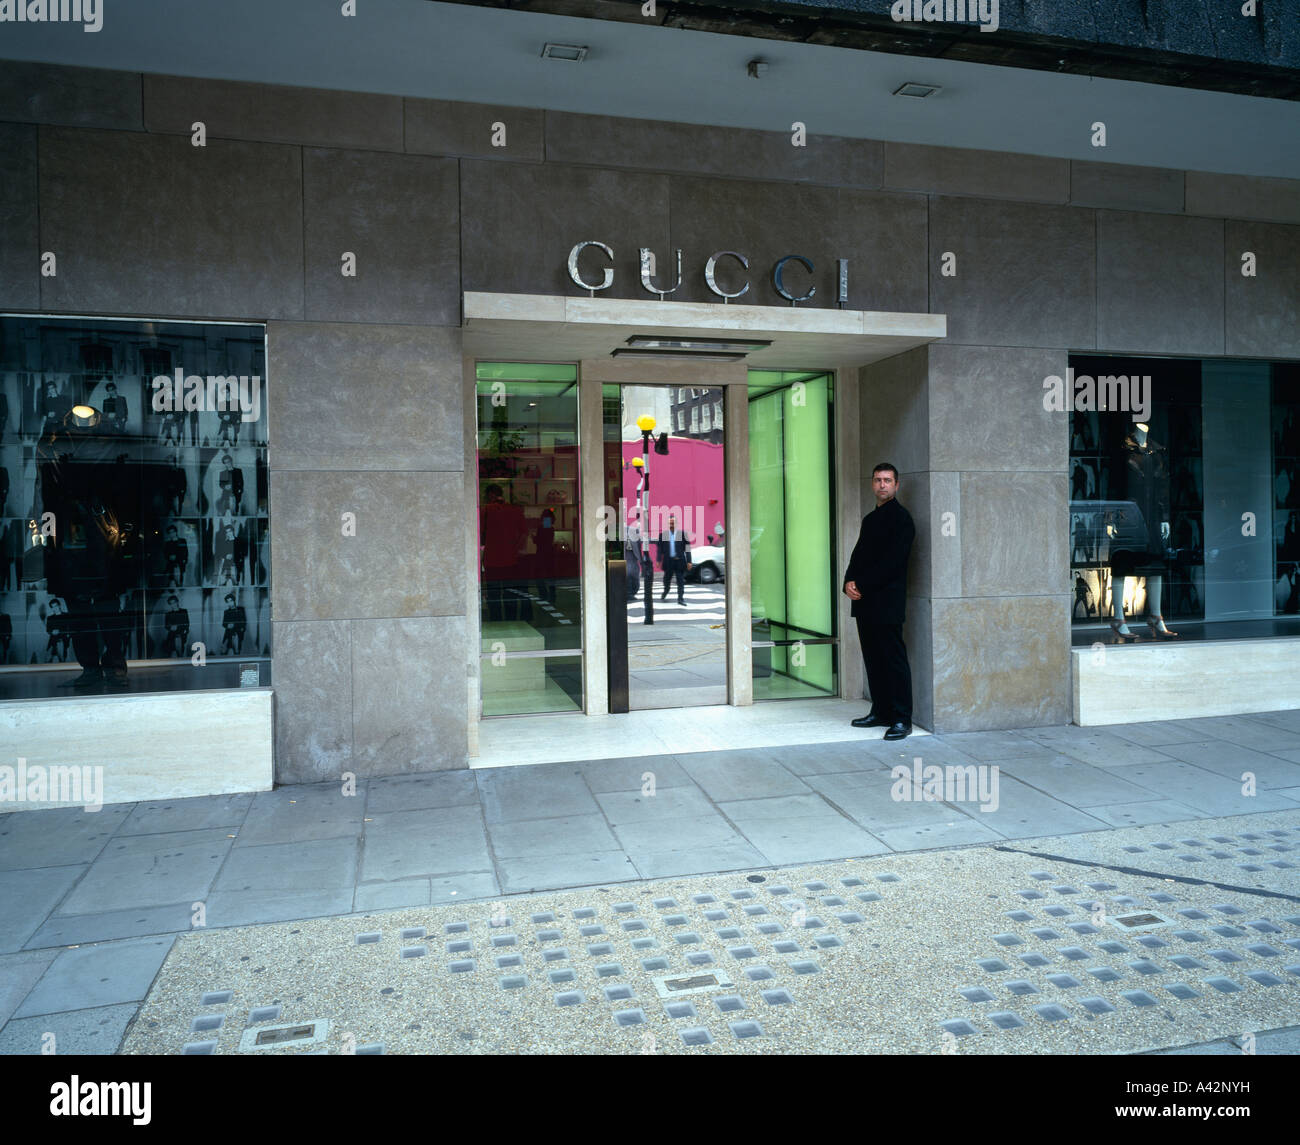 Doorman outside the Gucci shop in London Photo - Alamy